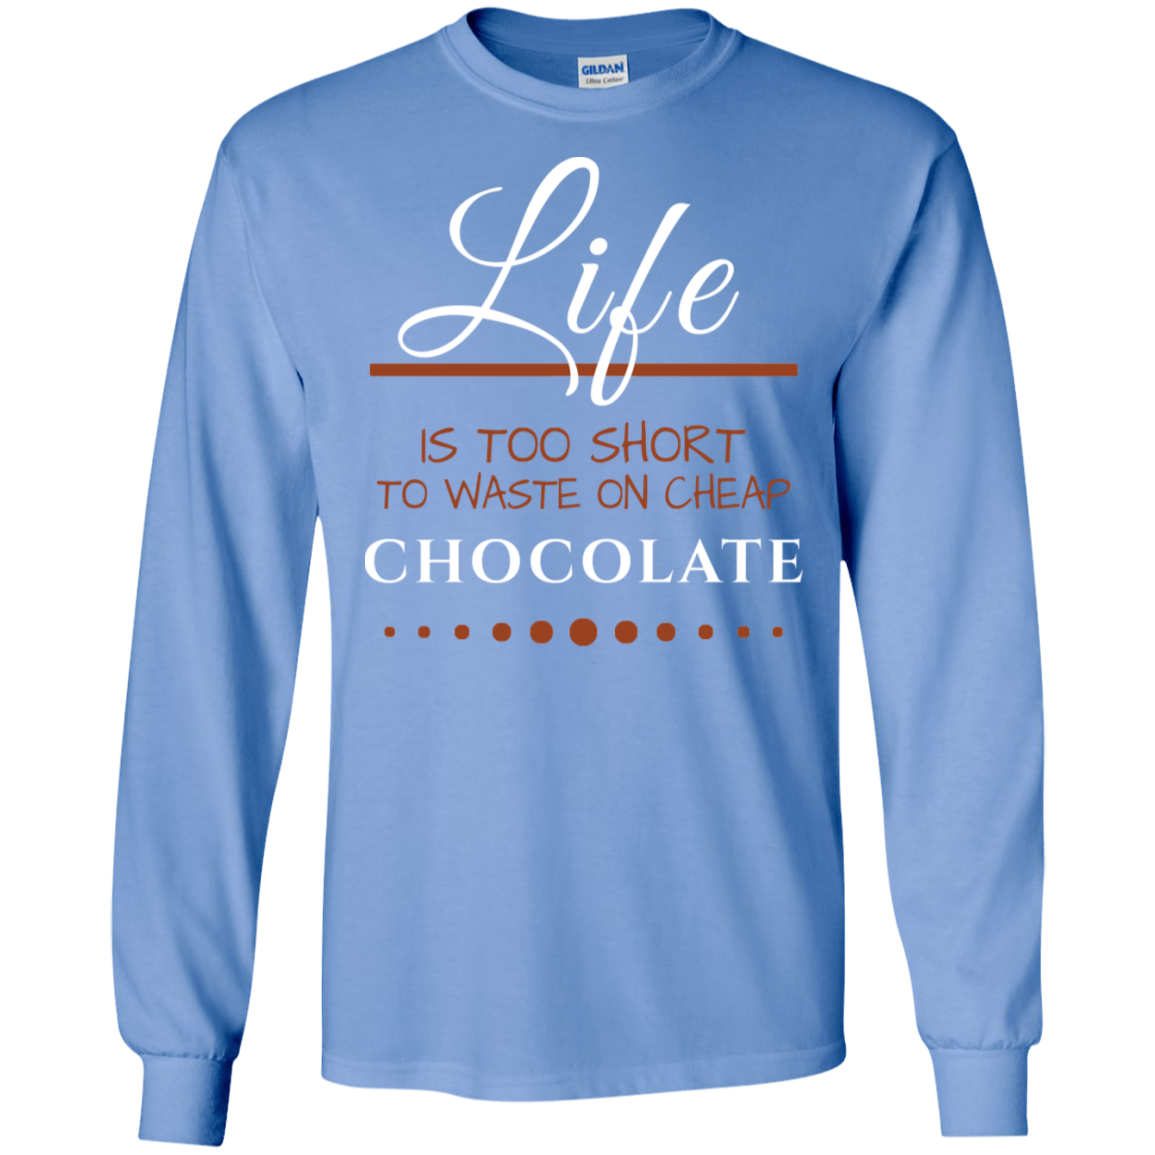 Life is too Short - Chocolate Unisex T-Shirts